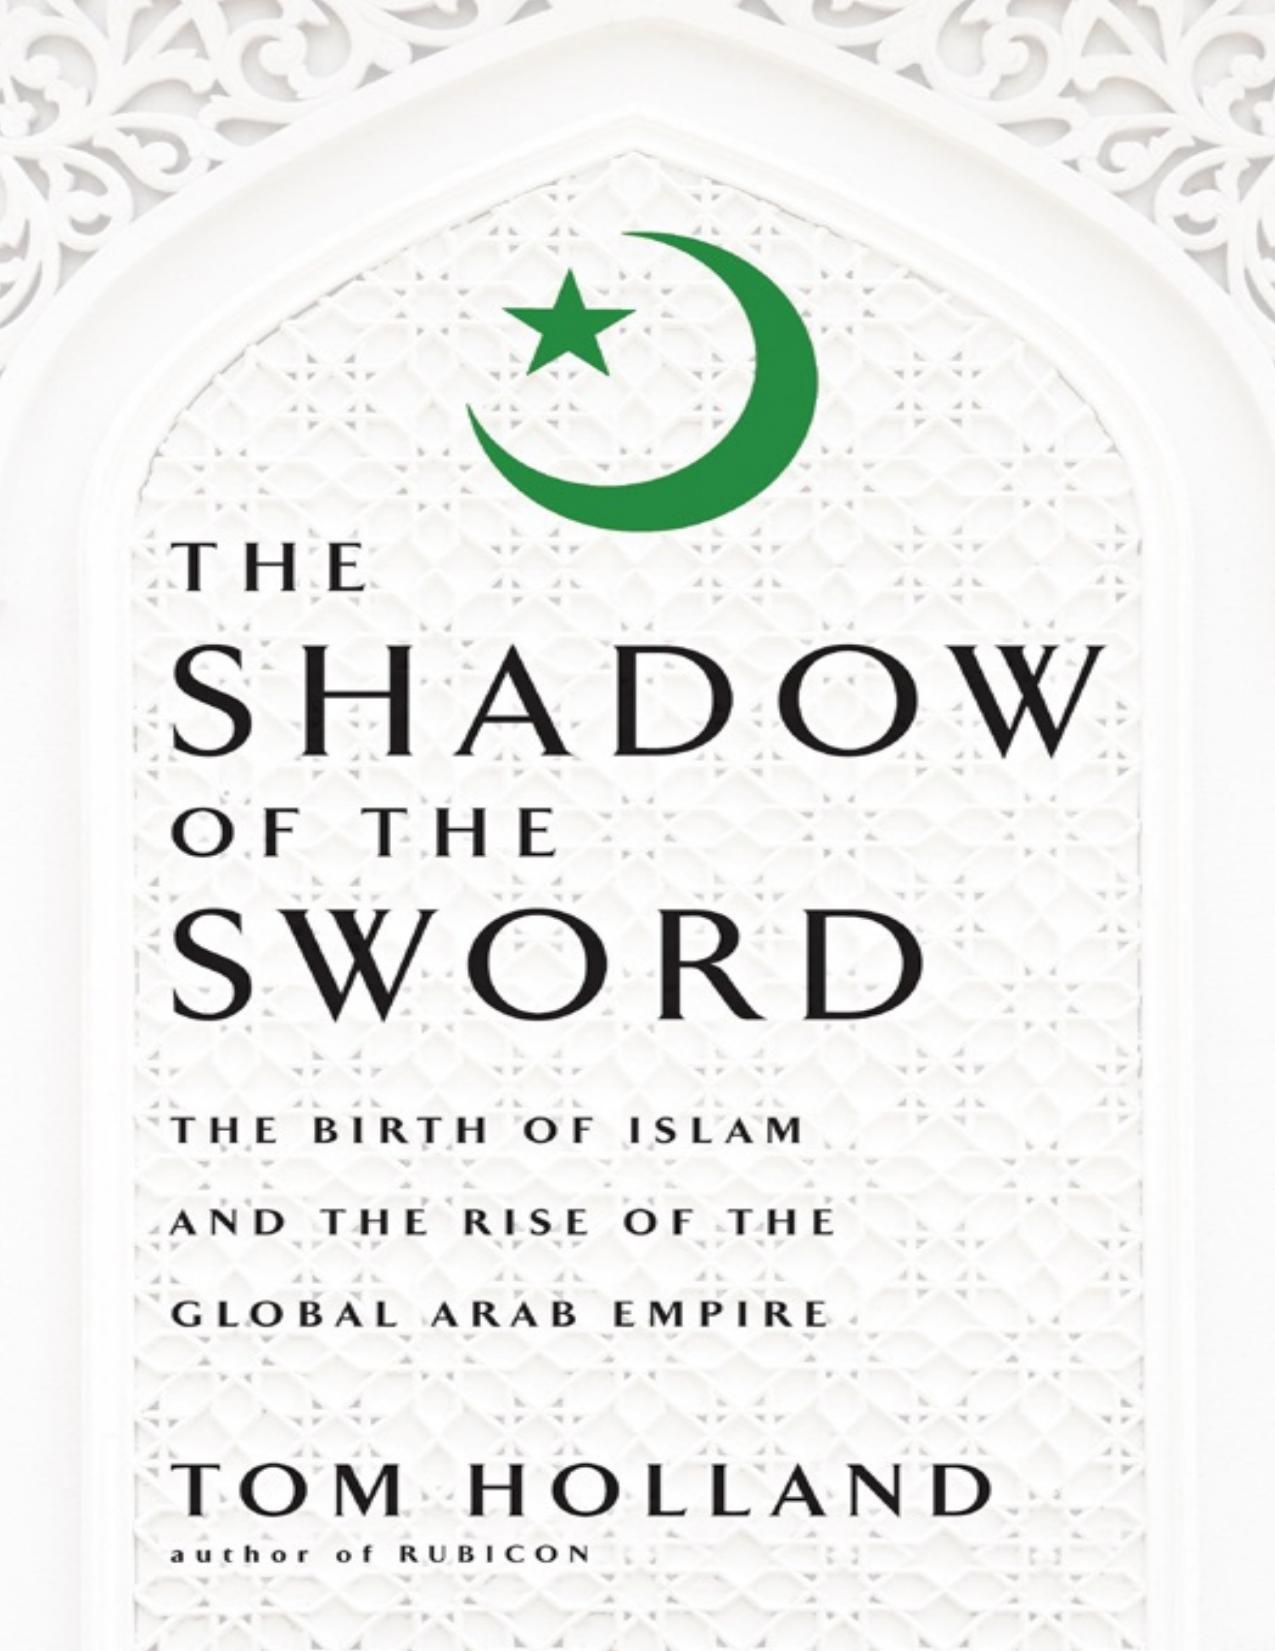 In the Shadow of the Sword: The Birth of Islam and the Rise of the Global Arab Empire - PDFDrive.com